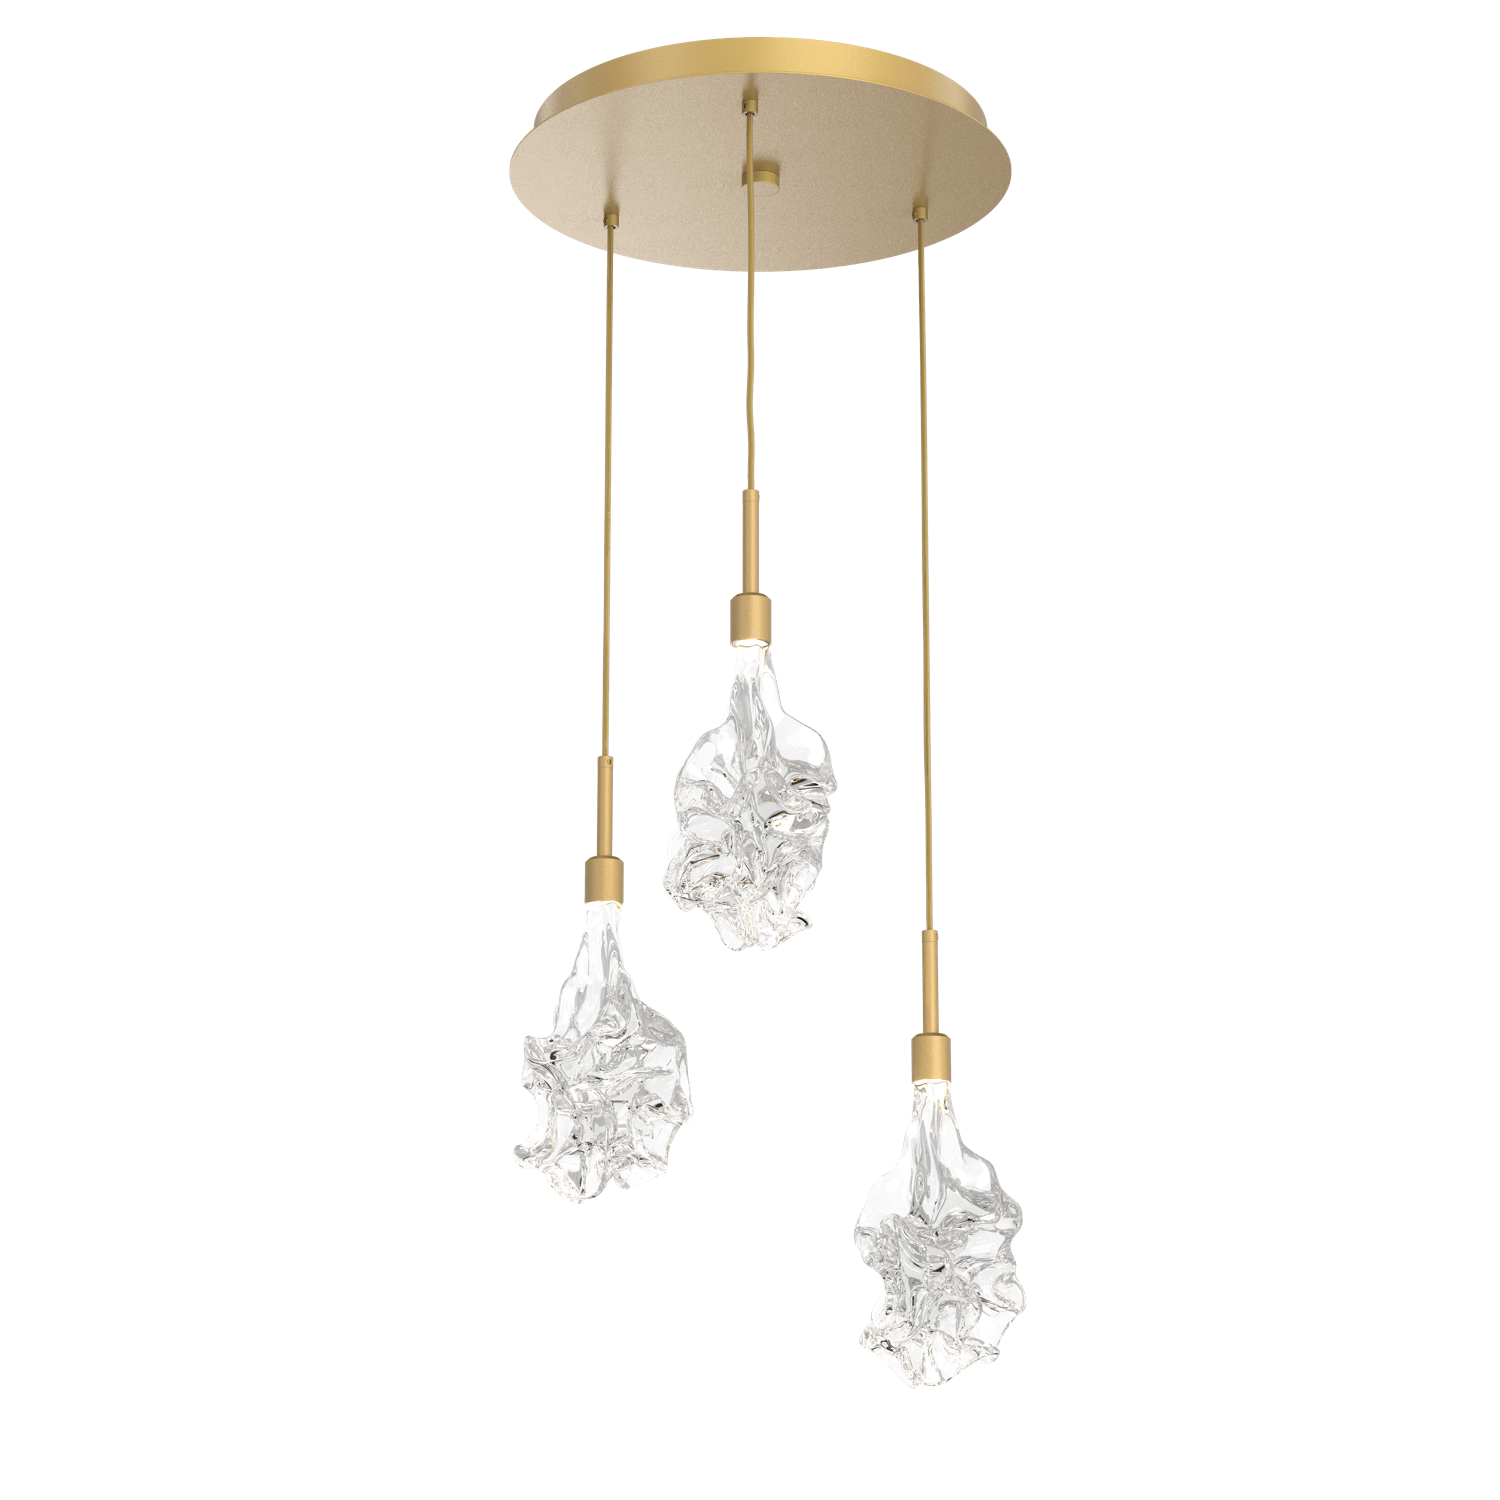 CHB0059-03-GB-Hammerton-Studio-Blossom-3-light-round-pendant-chandelier-with-gilded-brass-finish-and-clear-handblown-crystal-glass-shades-and-LED-lamping